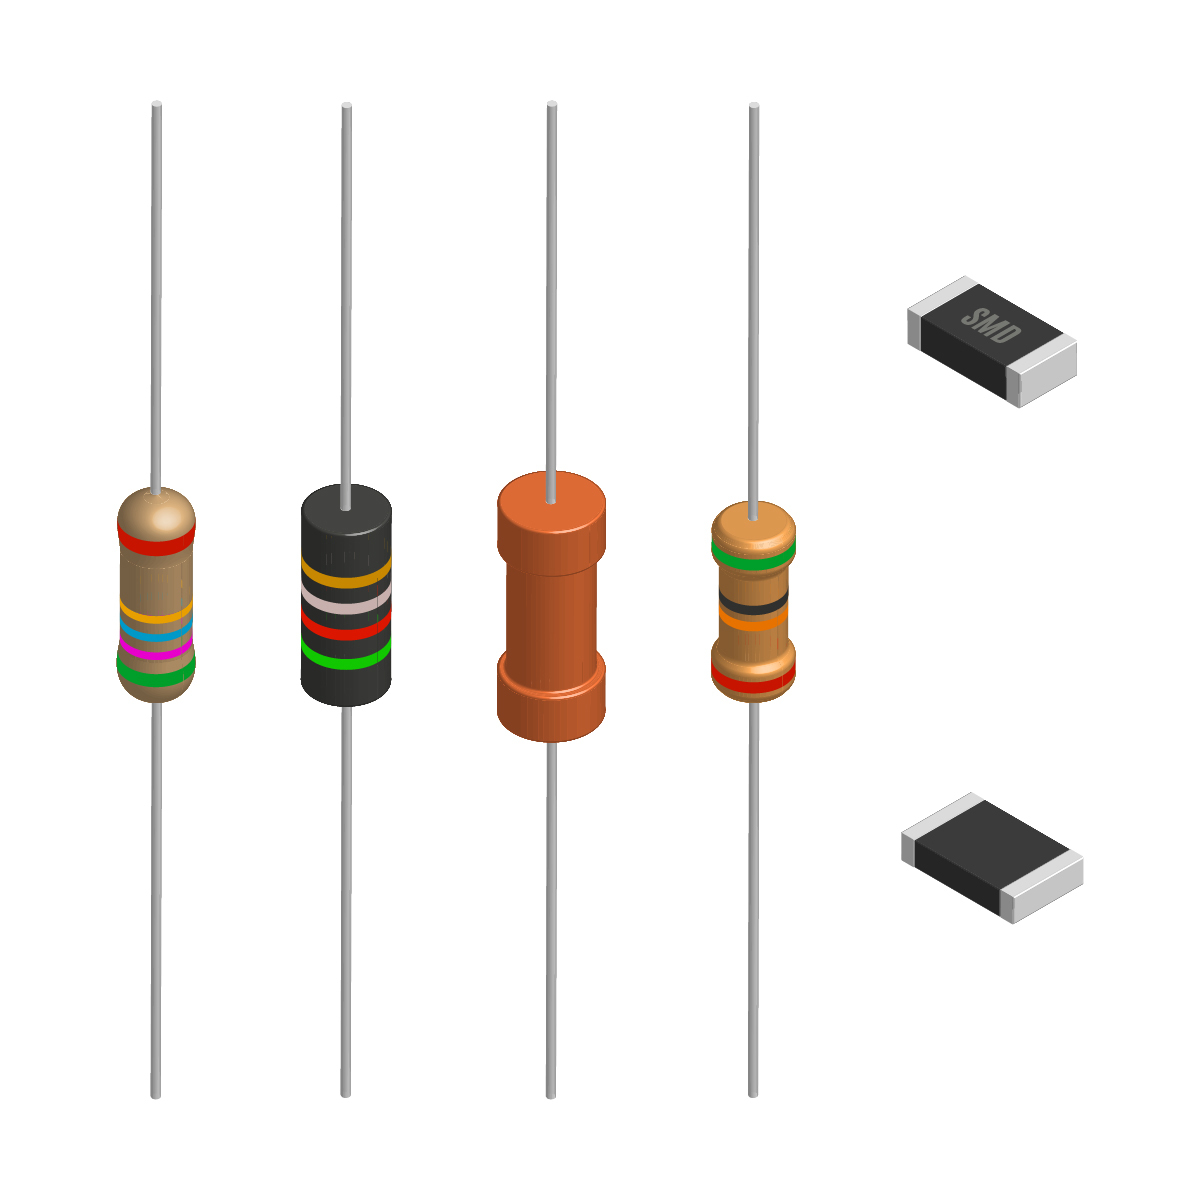 surface-mount-and-through-hole-resistors.jpg